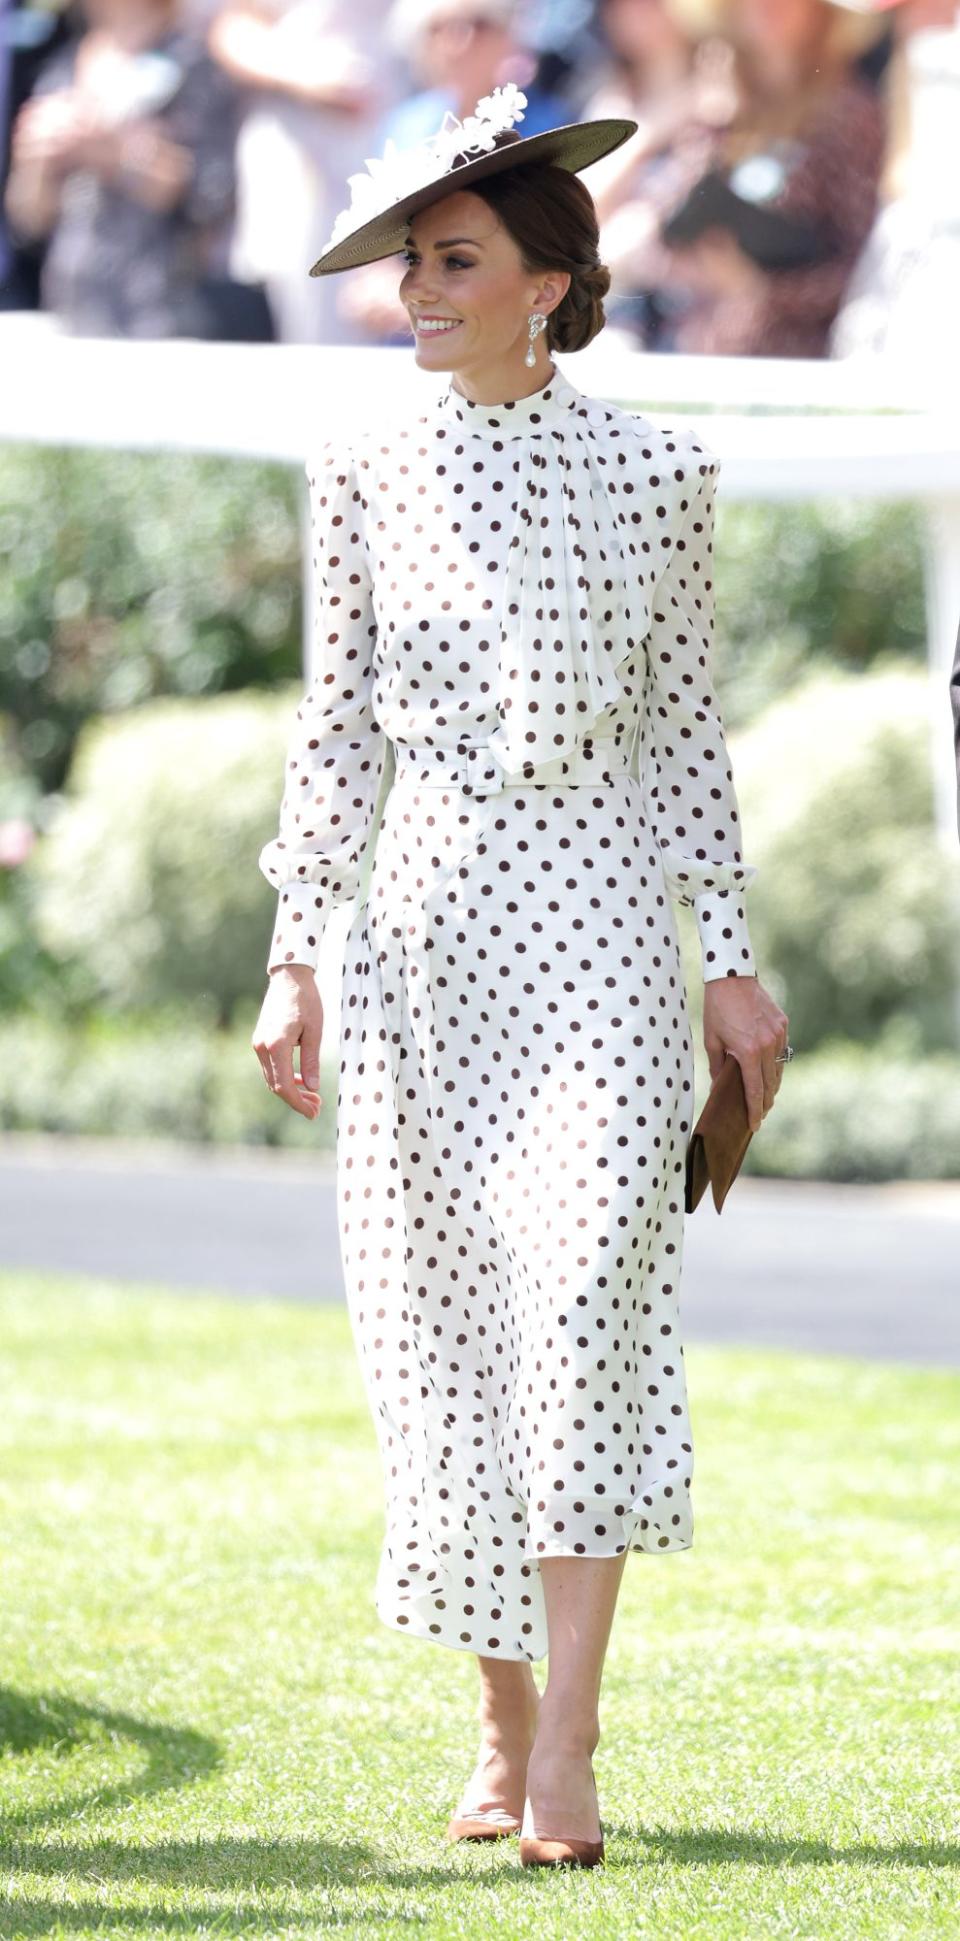 Kate Middleton's Chic Summer Style: Sun Hats, Shades and Dresses!